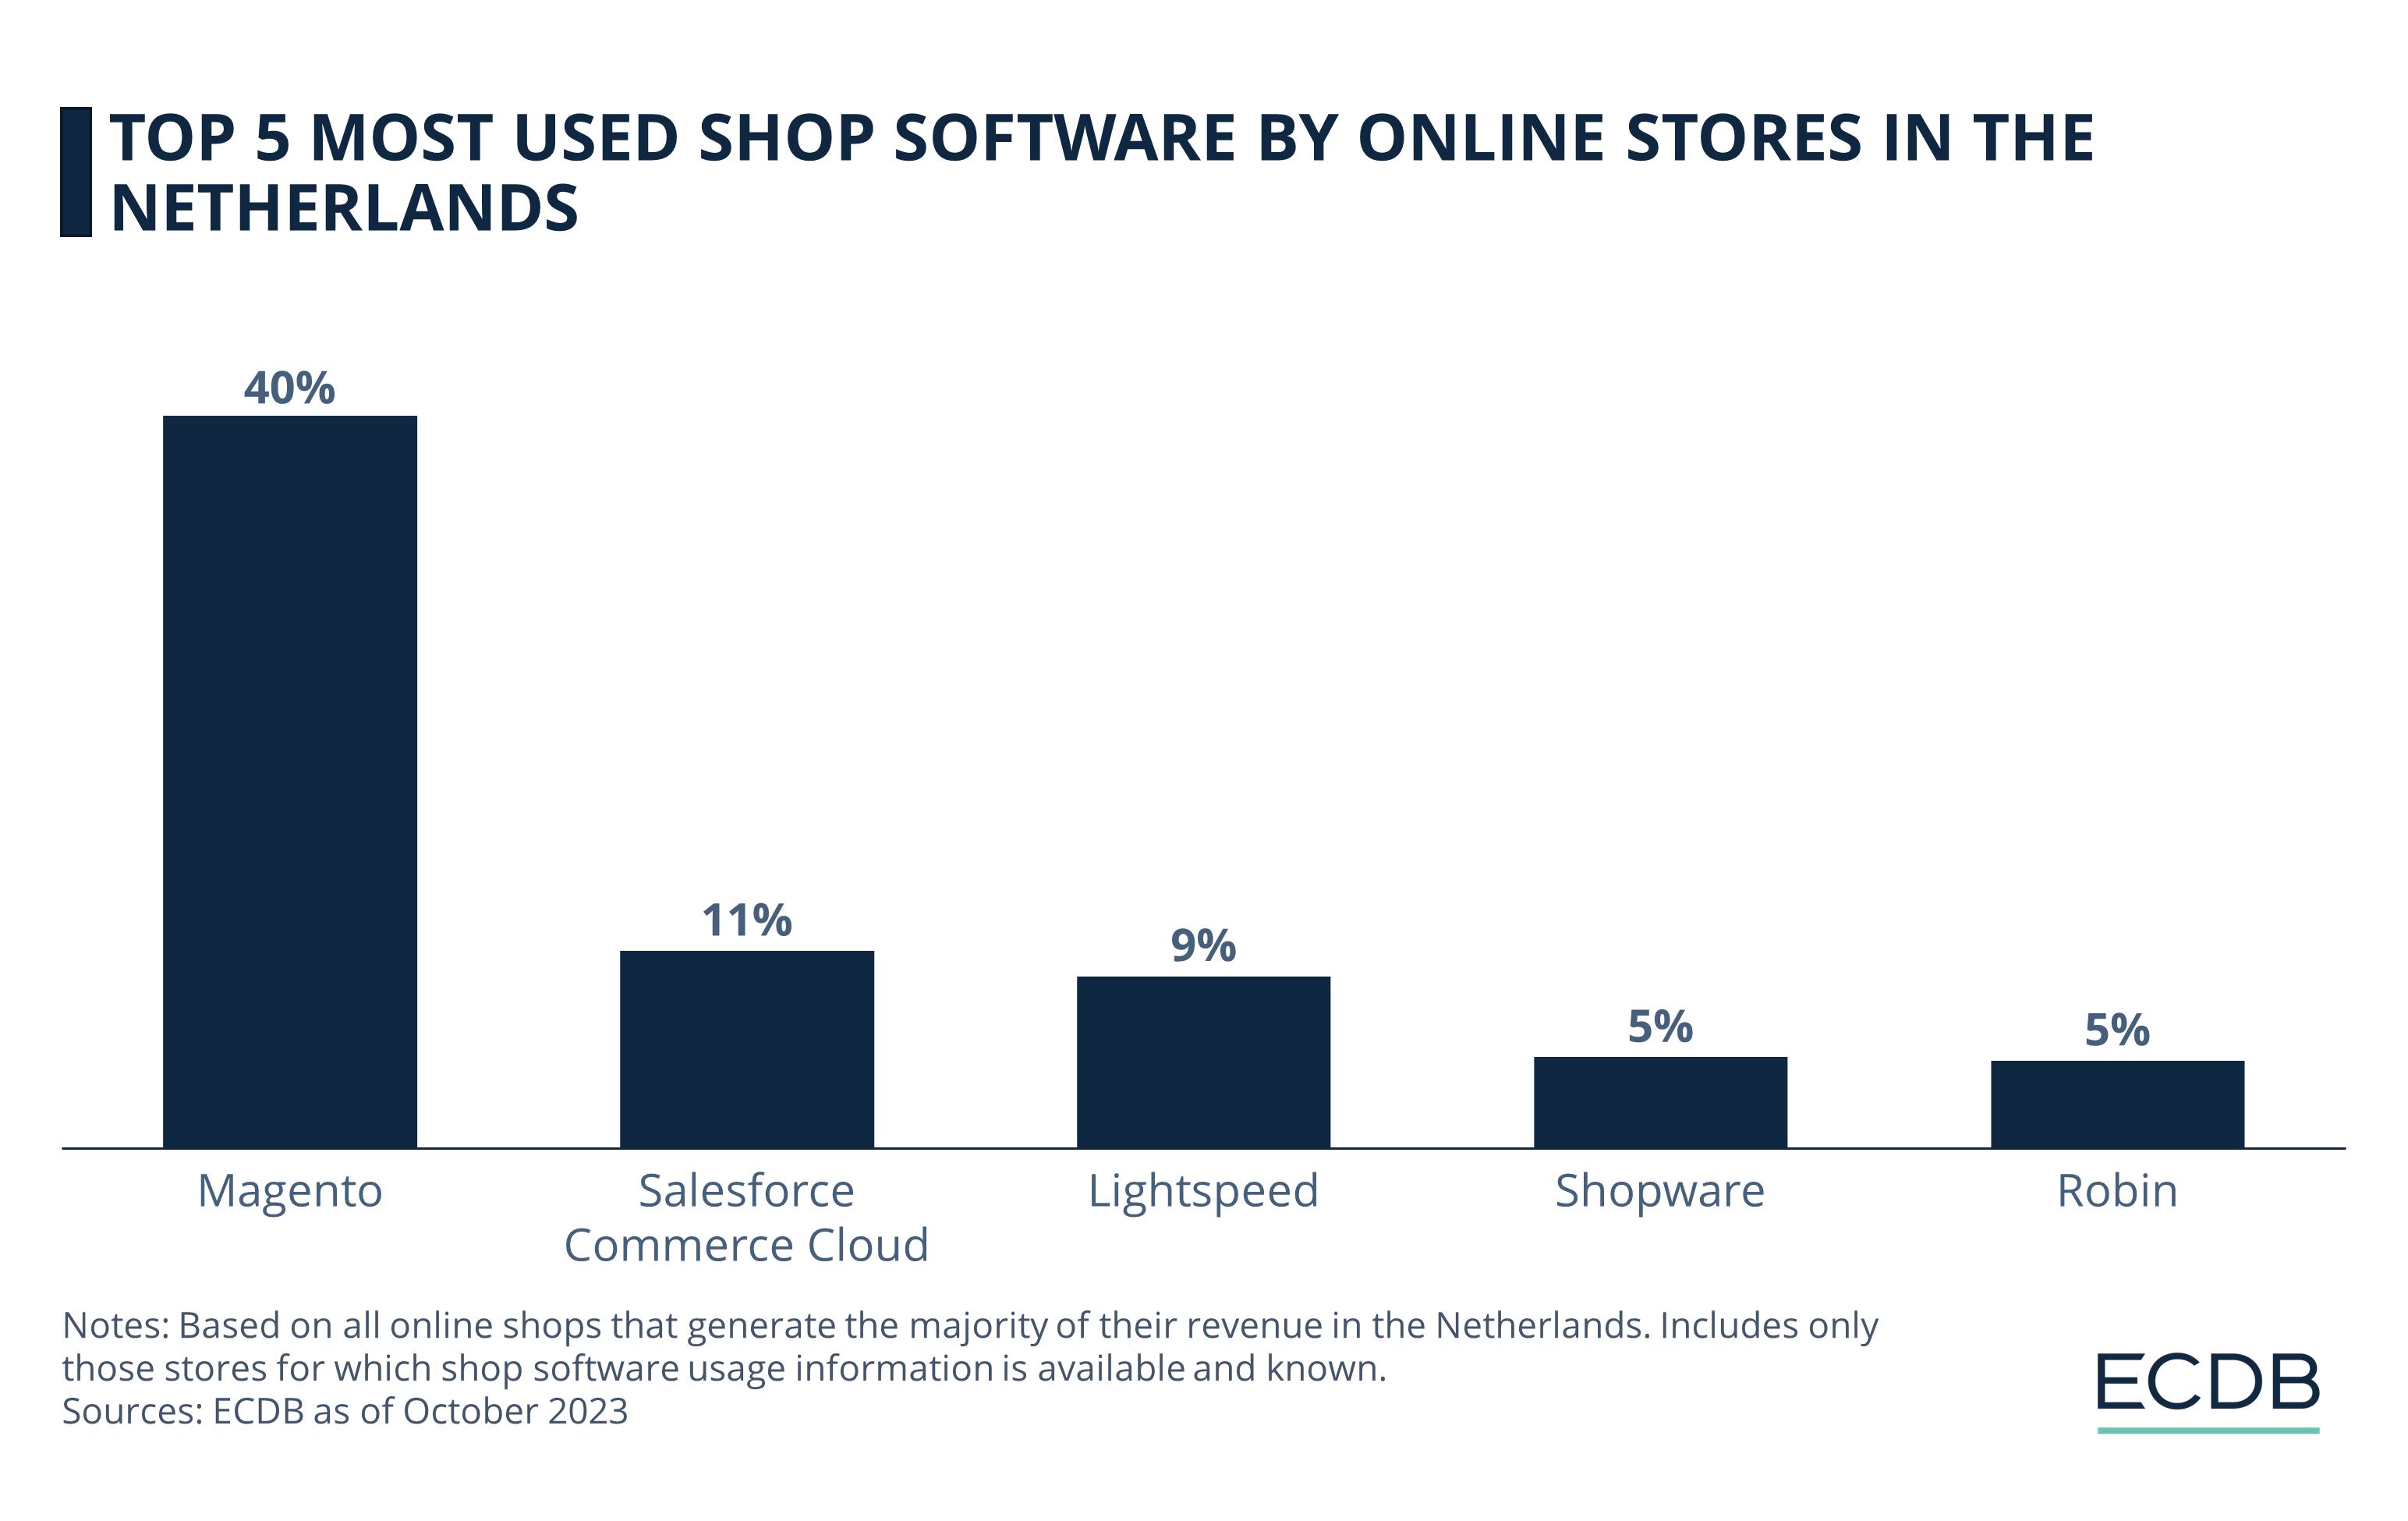 Top Five Most Used Shop Software by Online Stores in the Netherlands